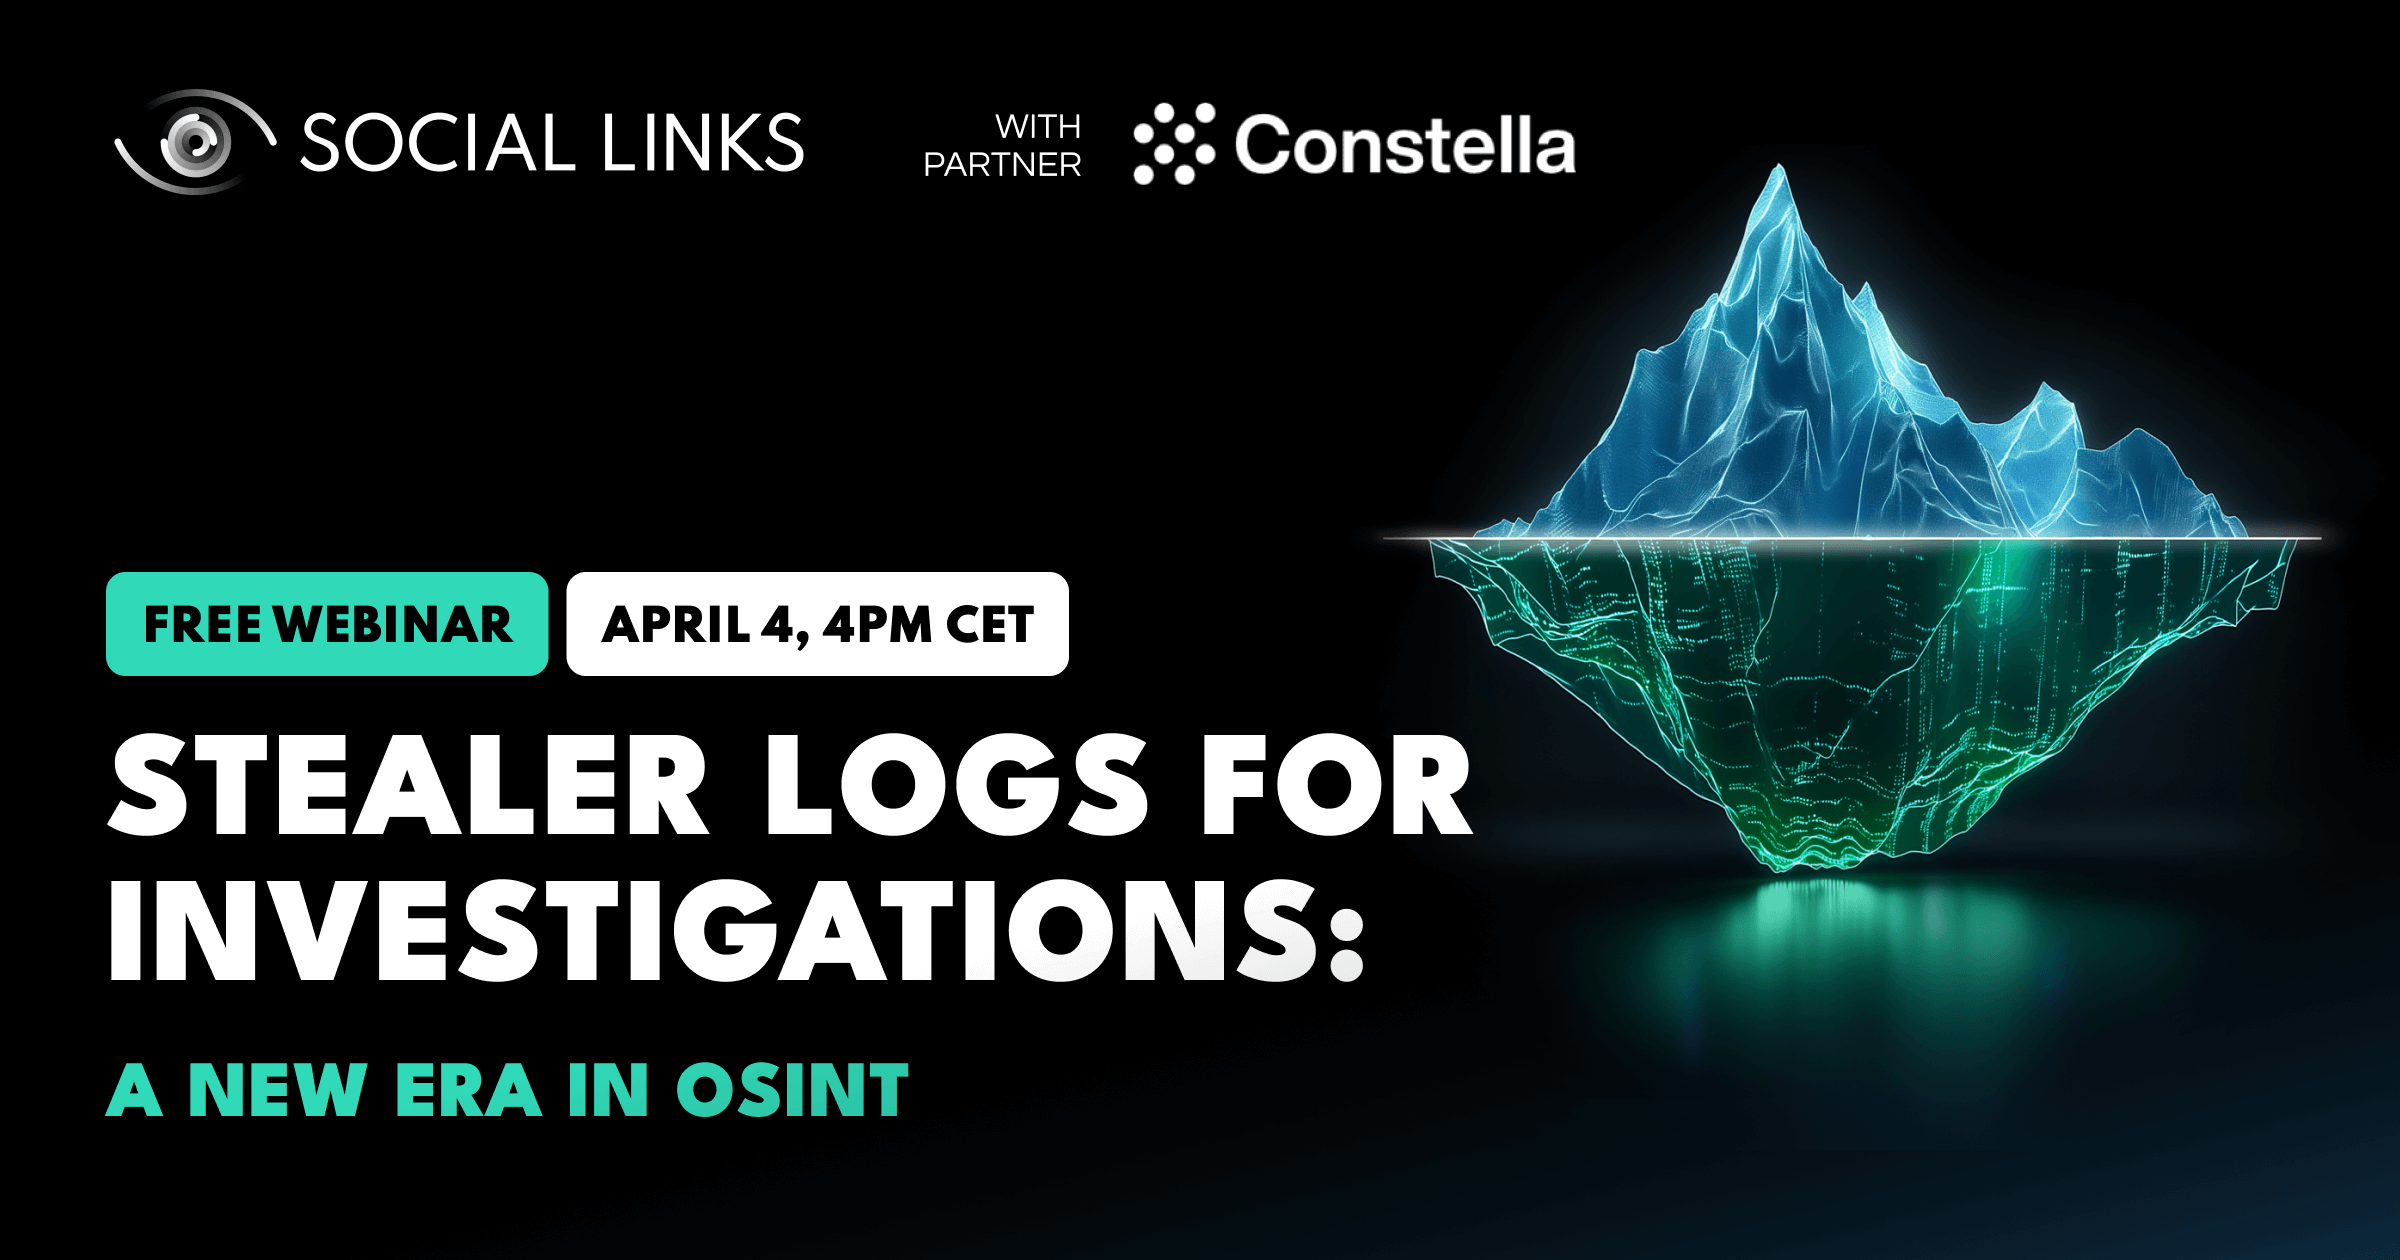 Free Webinar: Discover Stealer Logs and Meet Our New Darknet Data Provider